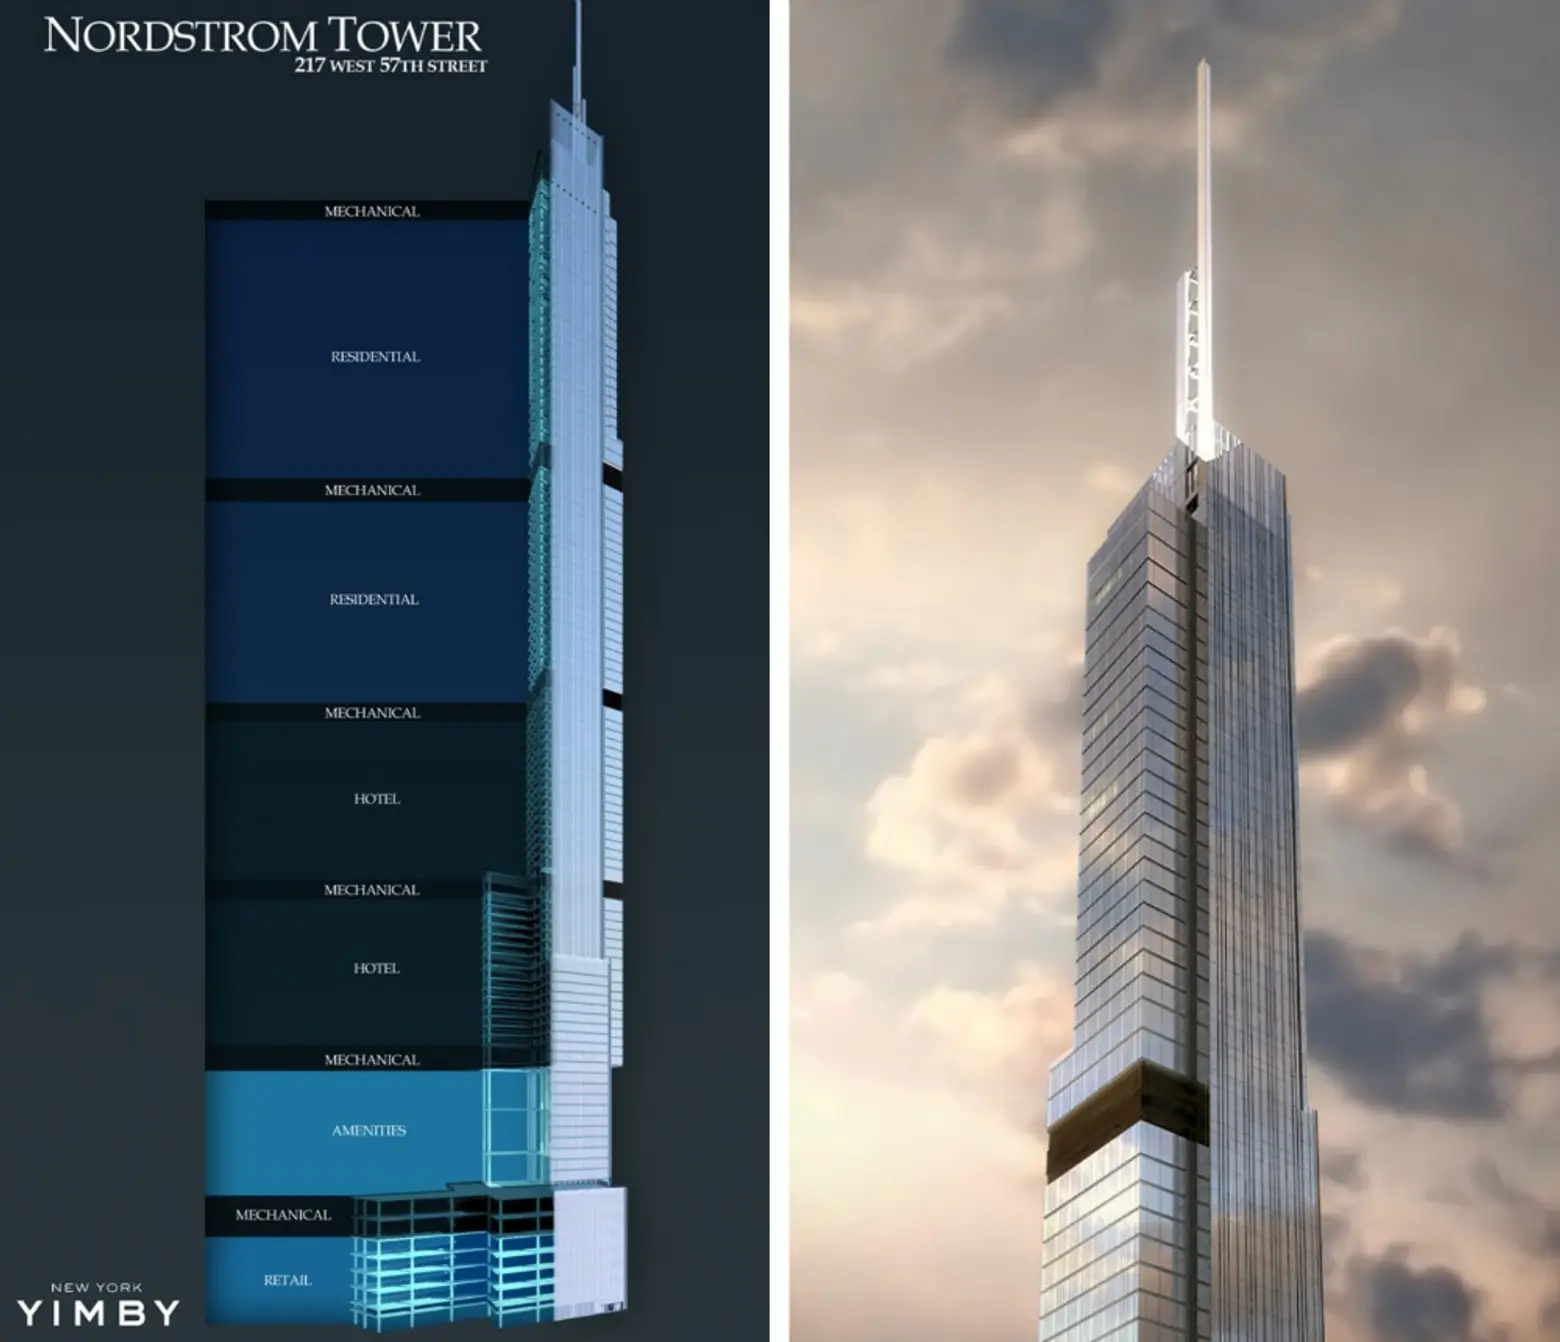 Official Image Released Of New York's 1775-Foot Nordstrom Tower